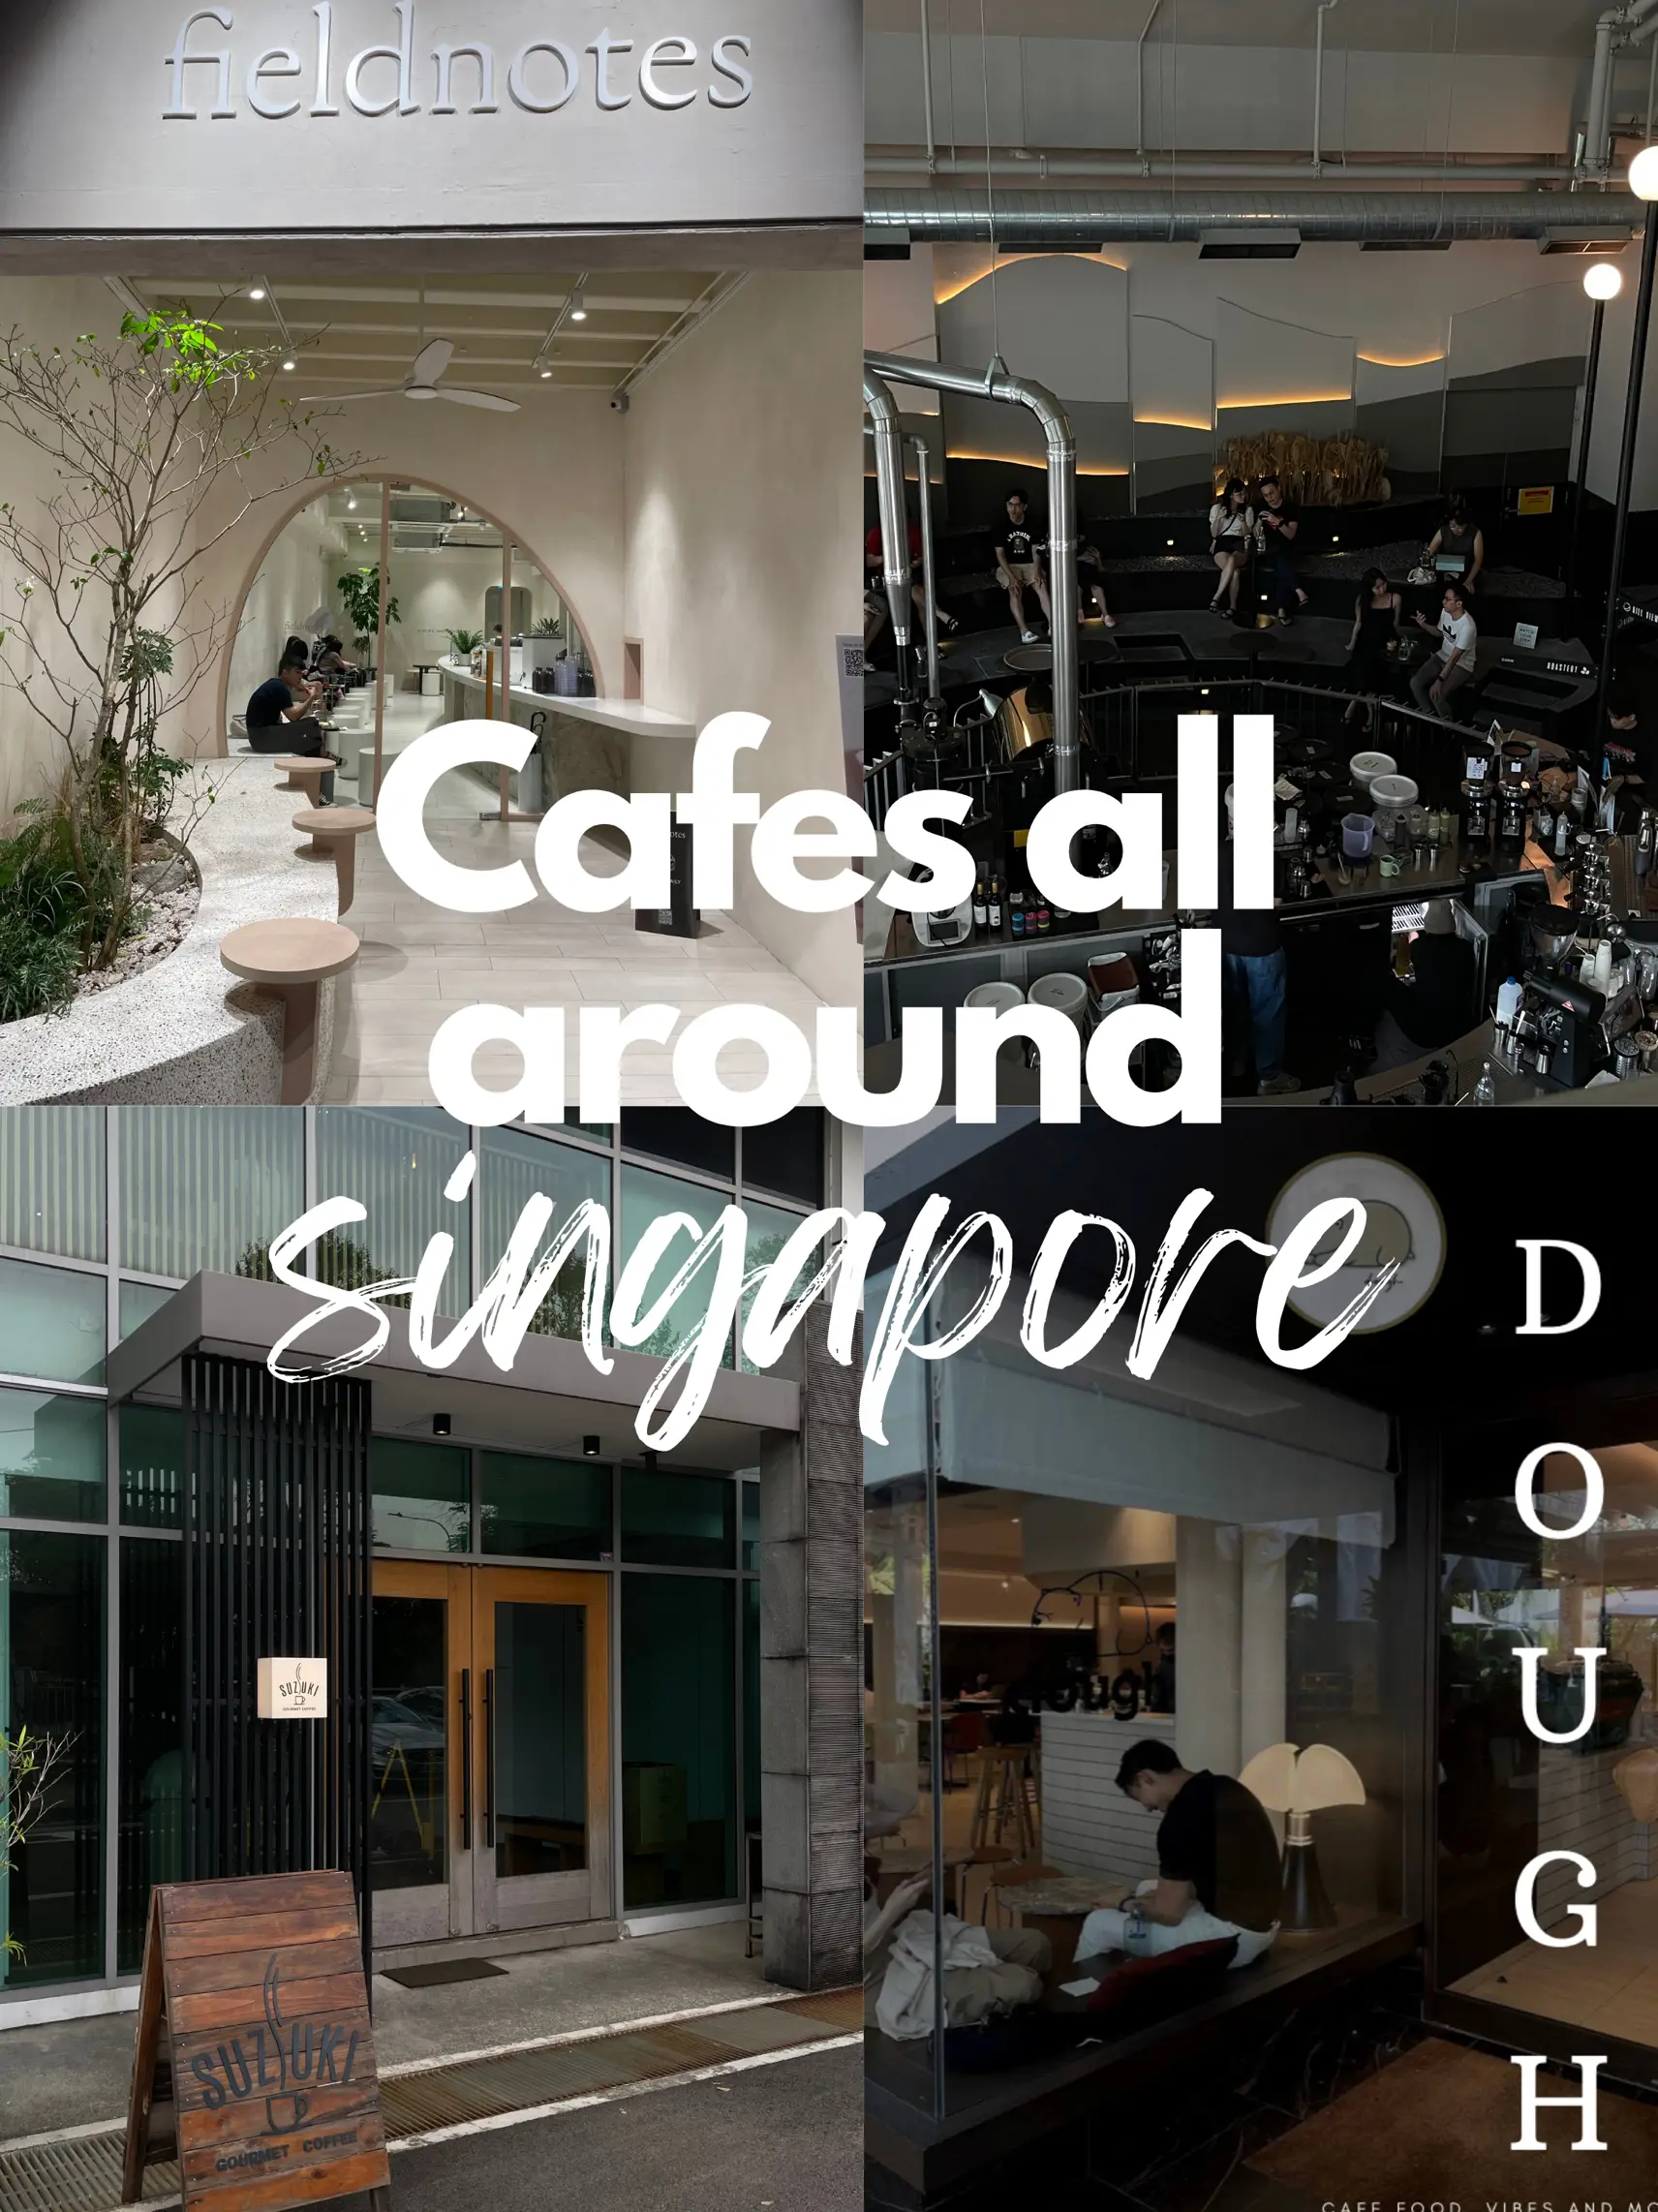 My cafe top picks around sg 🍵🍝🧇's images(0)